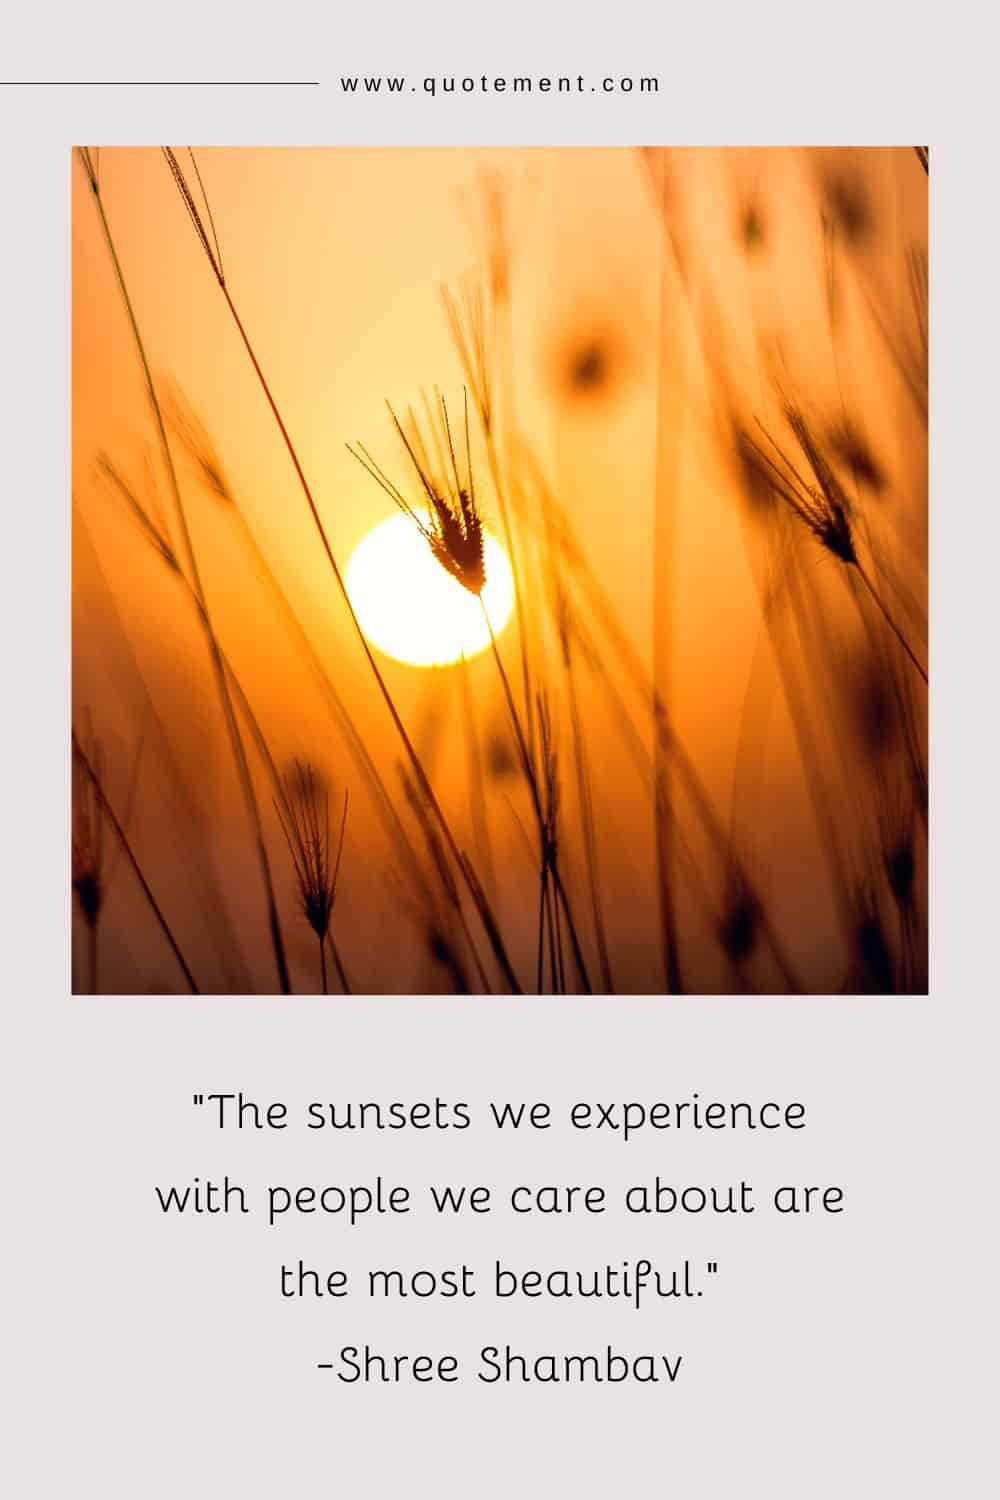 The sunsets we experience with people we care about are the most beautiful